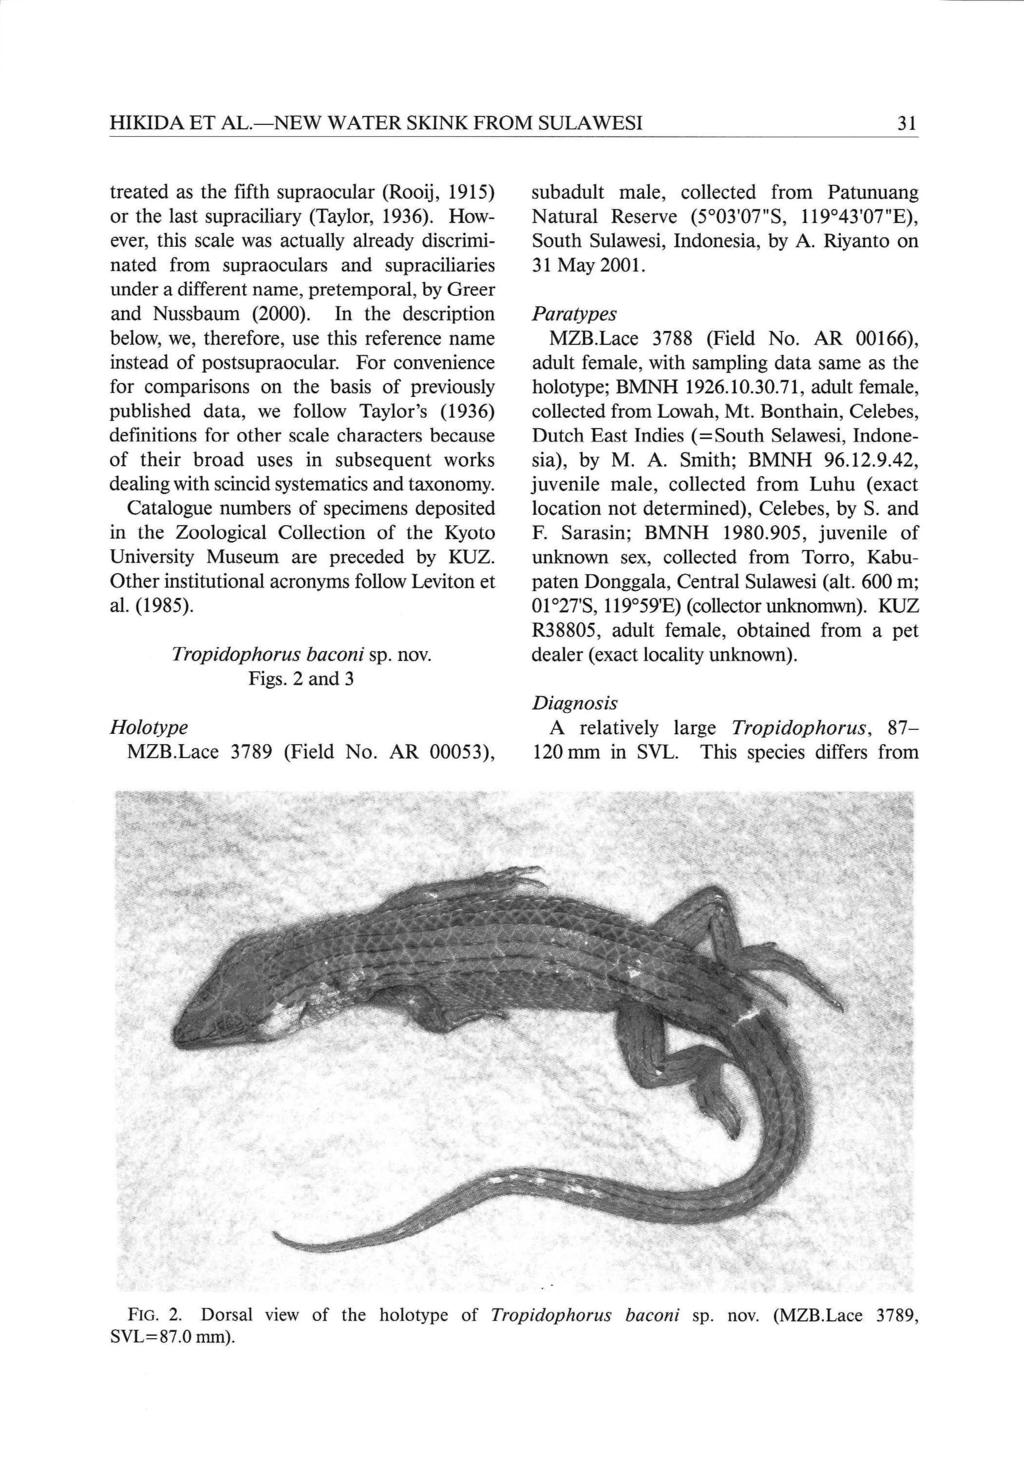 HIKIDA ET AL. -NEW WATER SKINK FROM SULAWESI treated as the fifth supraocular (Rooij, 1915) or the last supraciliary (Taylor, 1936).